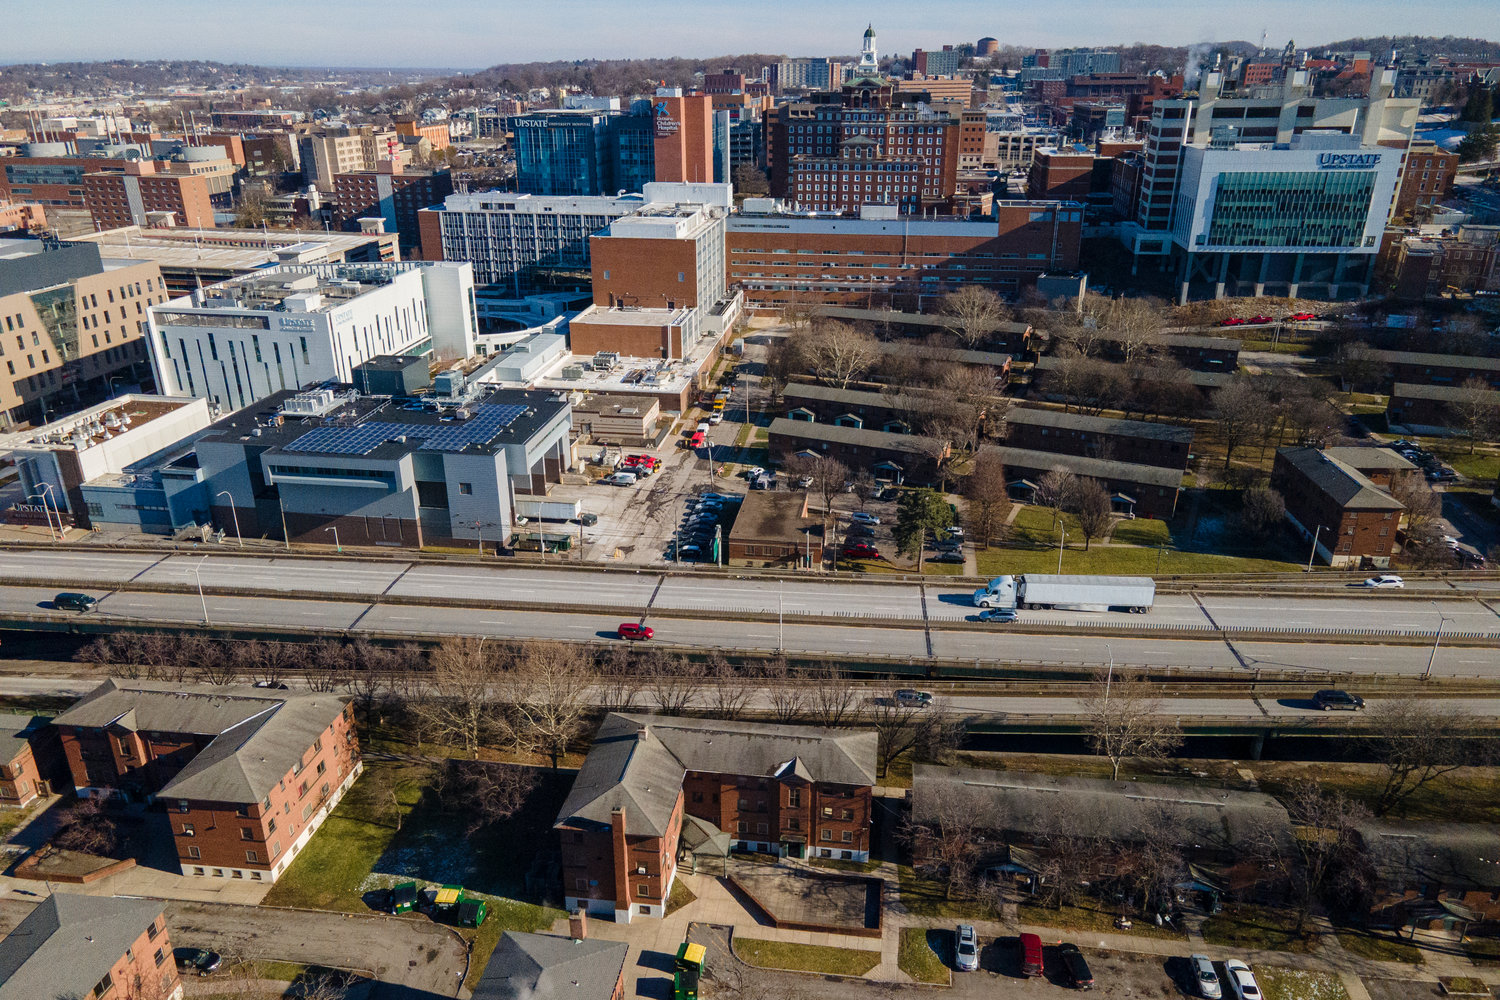 Interstate 81 passes through downtown Syracuse, N.Y., on Monday, Jan. 16, 2023. On the west side of the roadway are the Pioneer Homes public housing projects. Hospitals, hotels and other buildings are visible on the east side. (AP Photo/Ted Shaffrey)